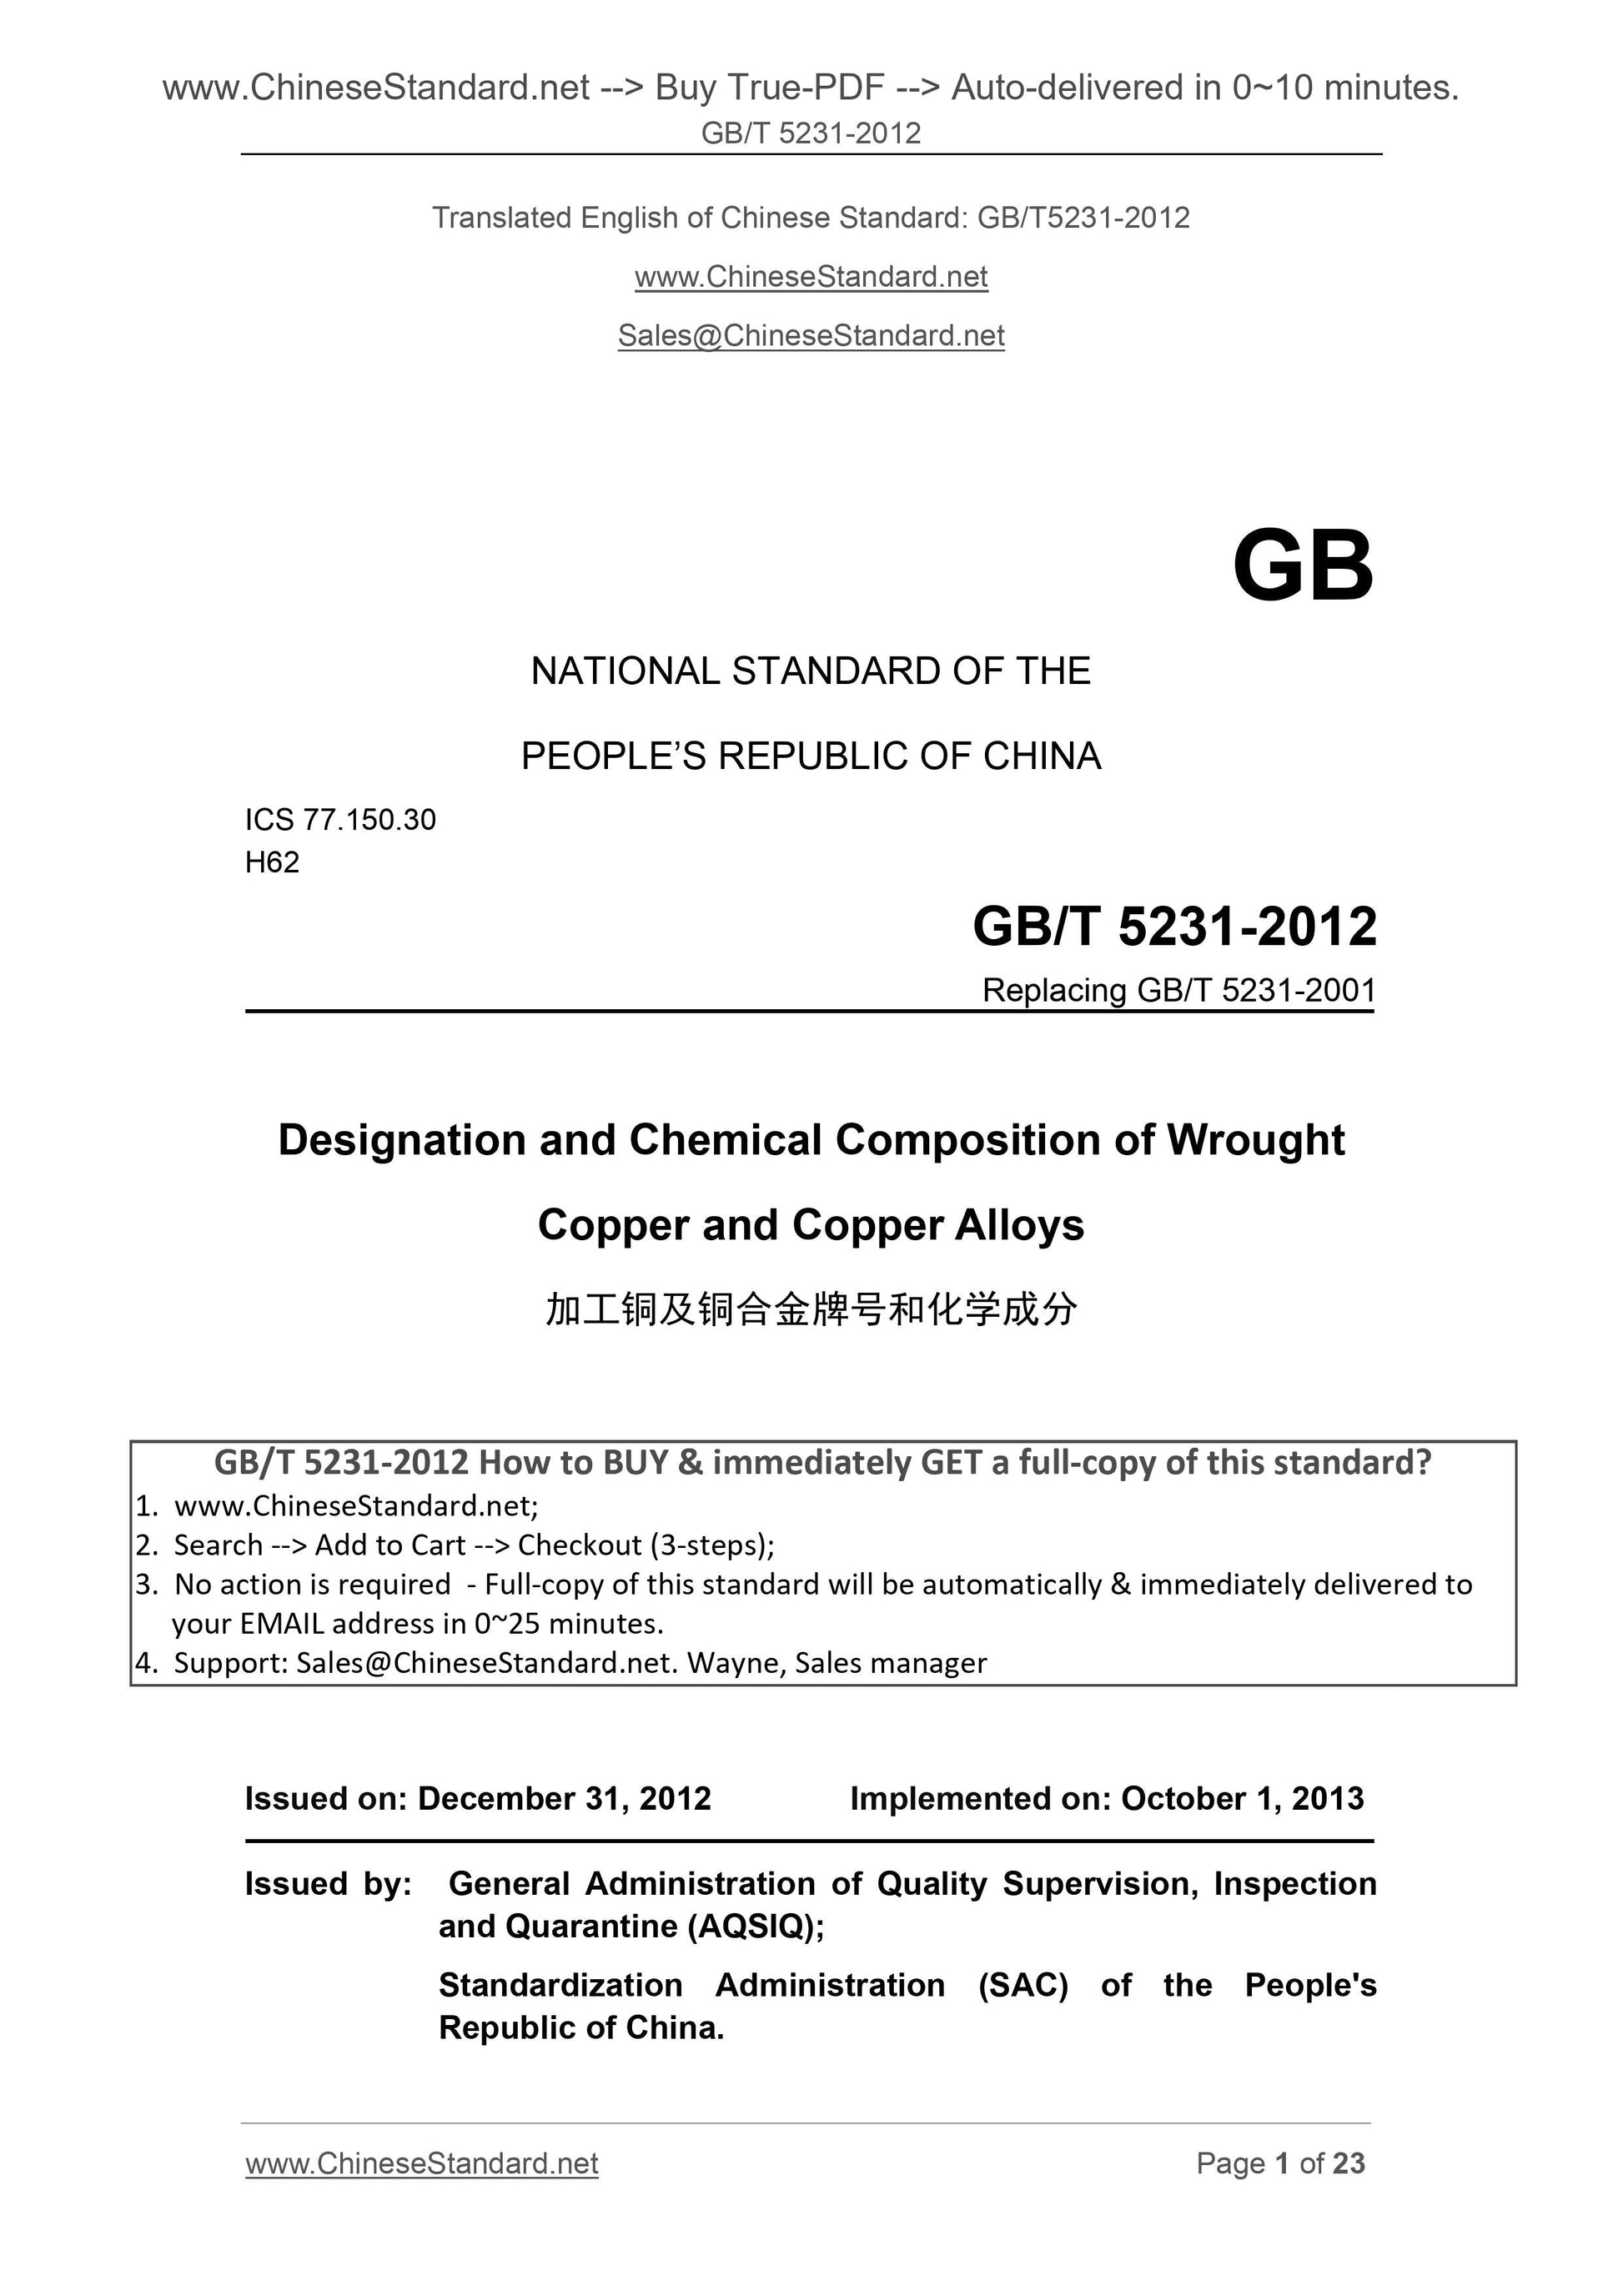 GB/T 5231-2012 Page 1